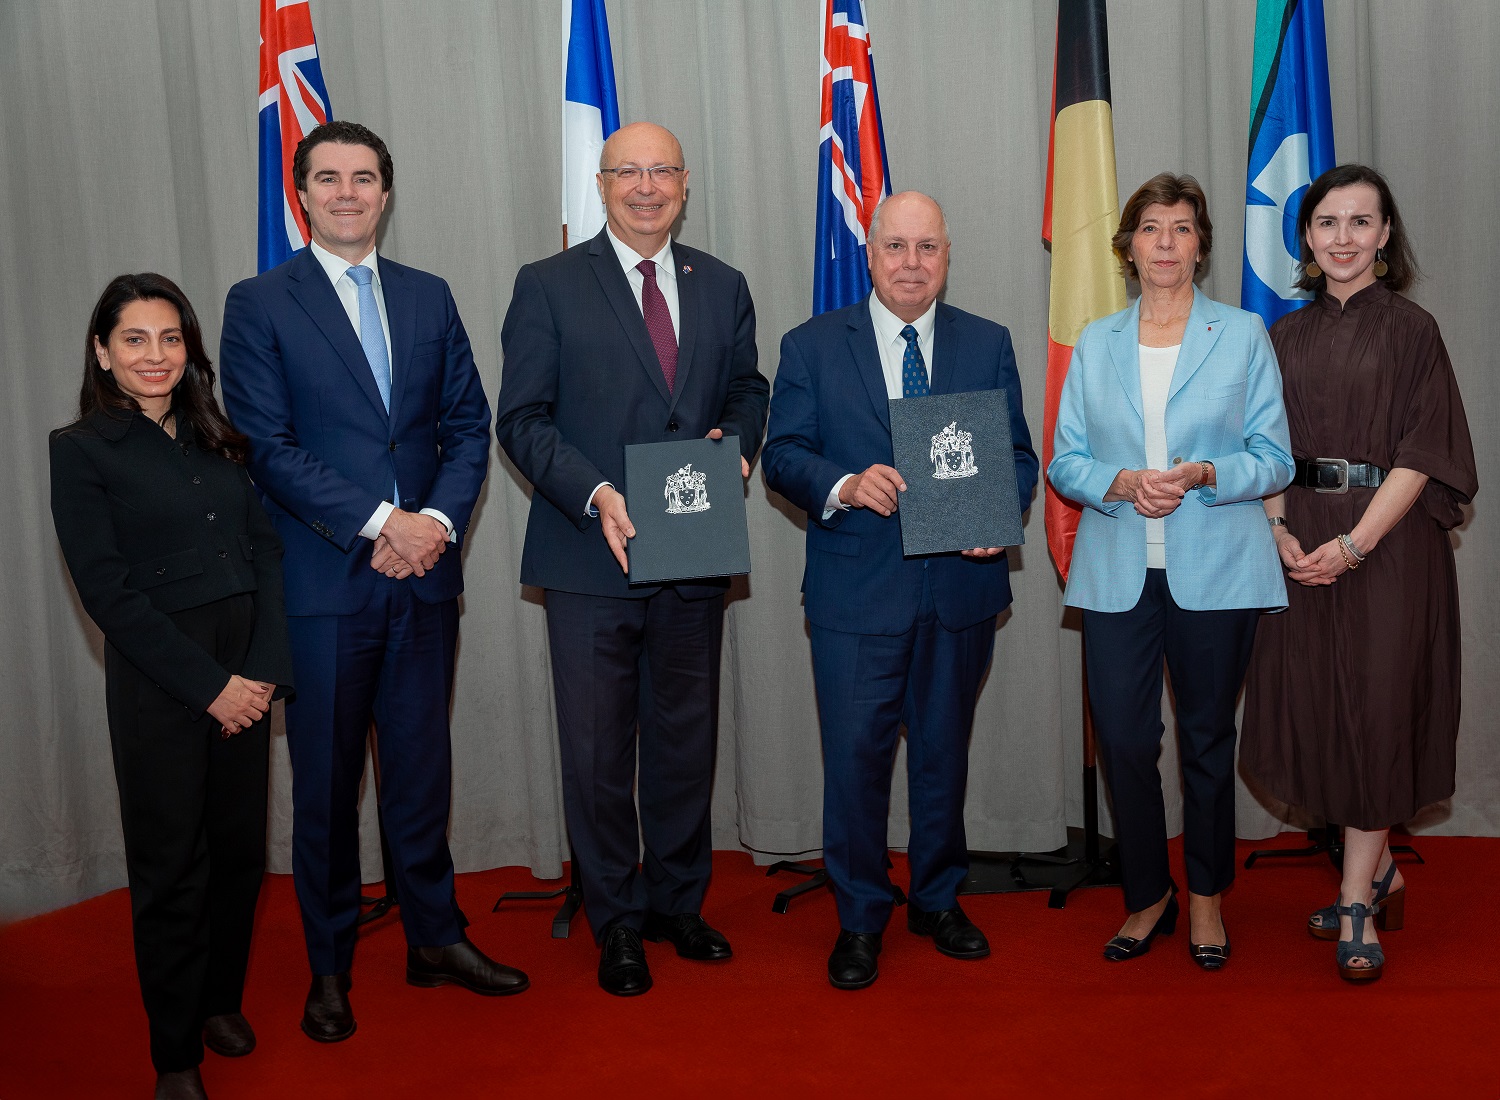 Pictured left to right: Victoria's Commissioner to Europe, Middle East, Türkiye and Africa, Gönül Serbest; Australian Assistant Foreign Minister, Tim Watts MP; France's Ambassador to Australia, His Excellency Mr Jean-Pierre Thébault; Victoria's Treasurer, Tim Pallas MP; French Foreign Minister, Catherine Colonna; CEO Global Victoria, Invest Victoria, Danni Jarrett